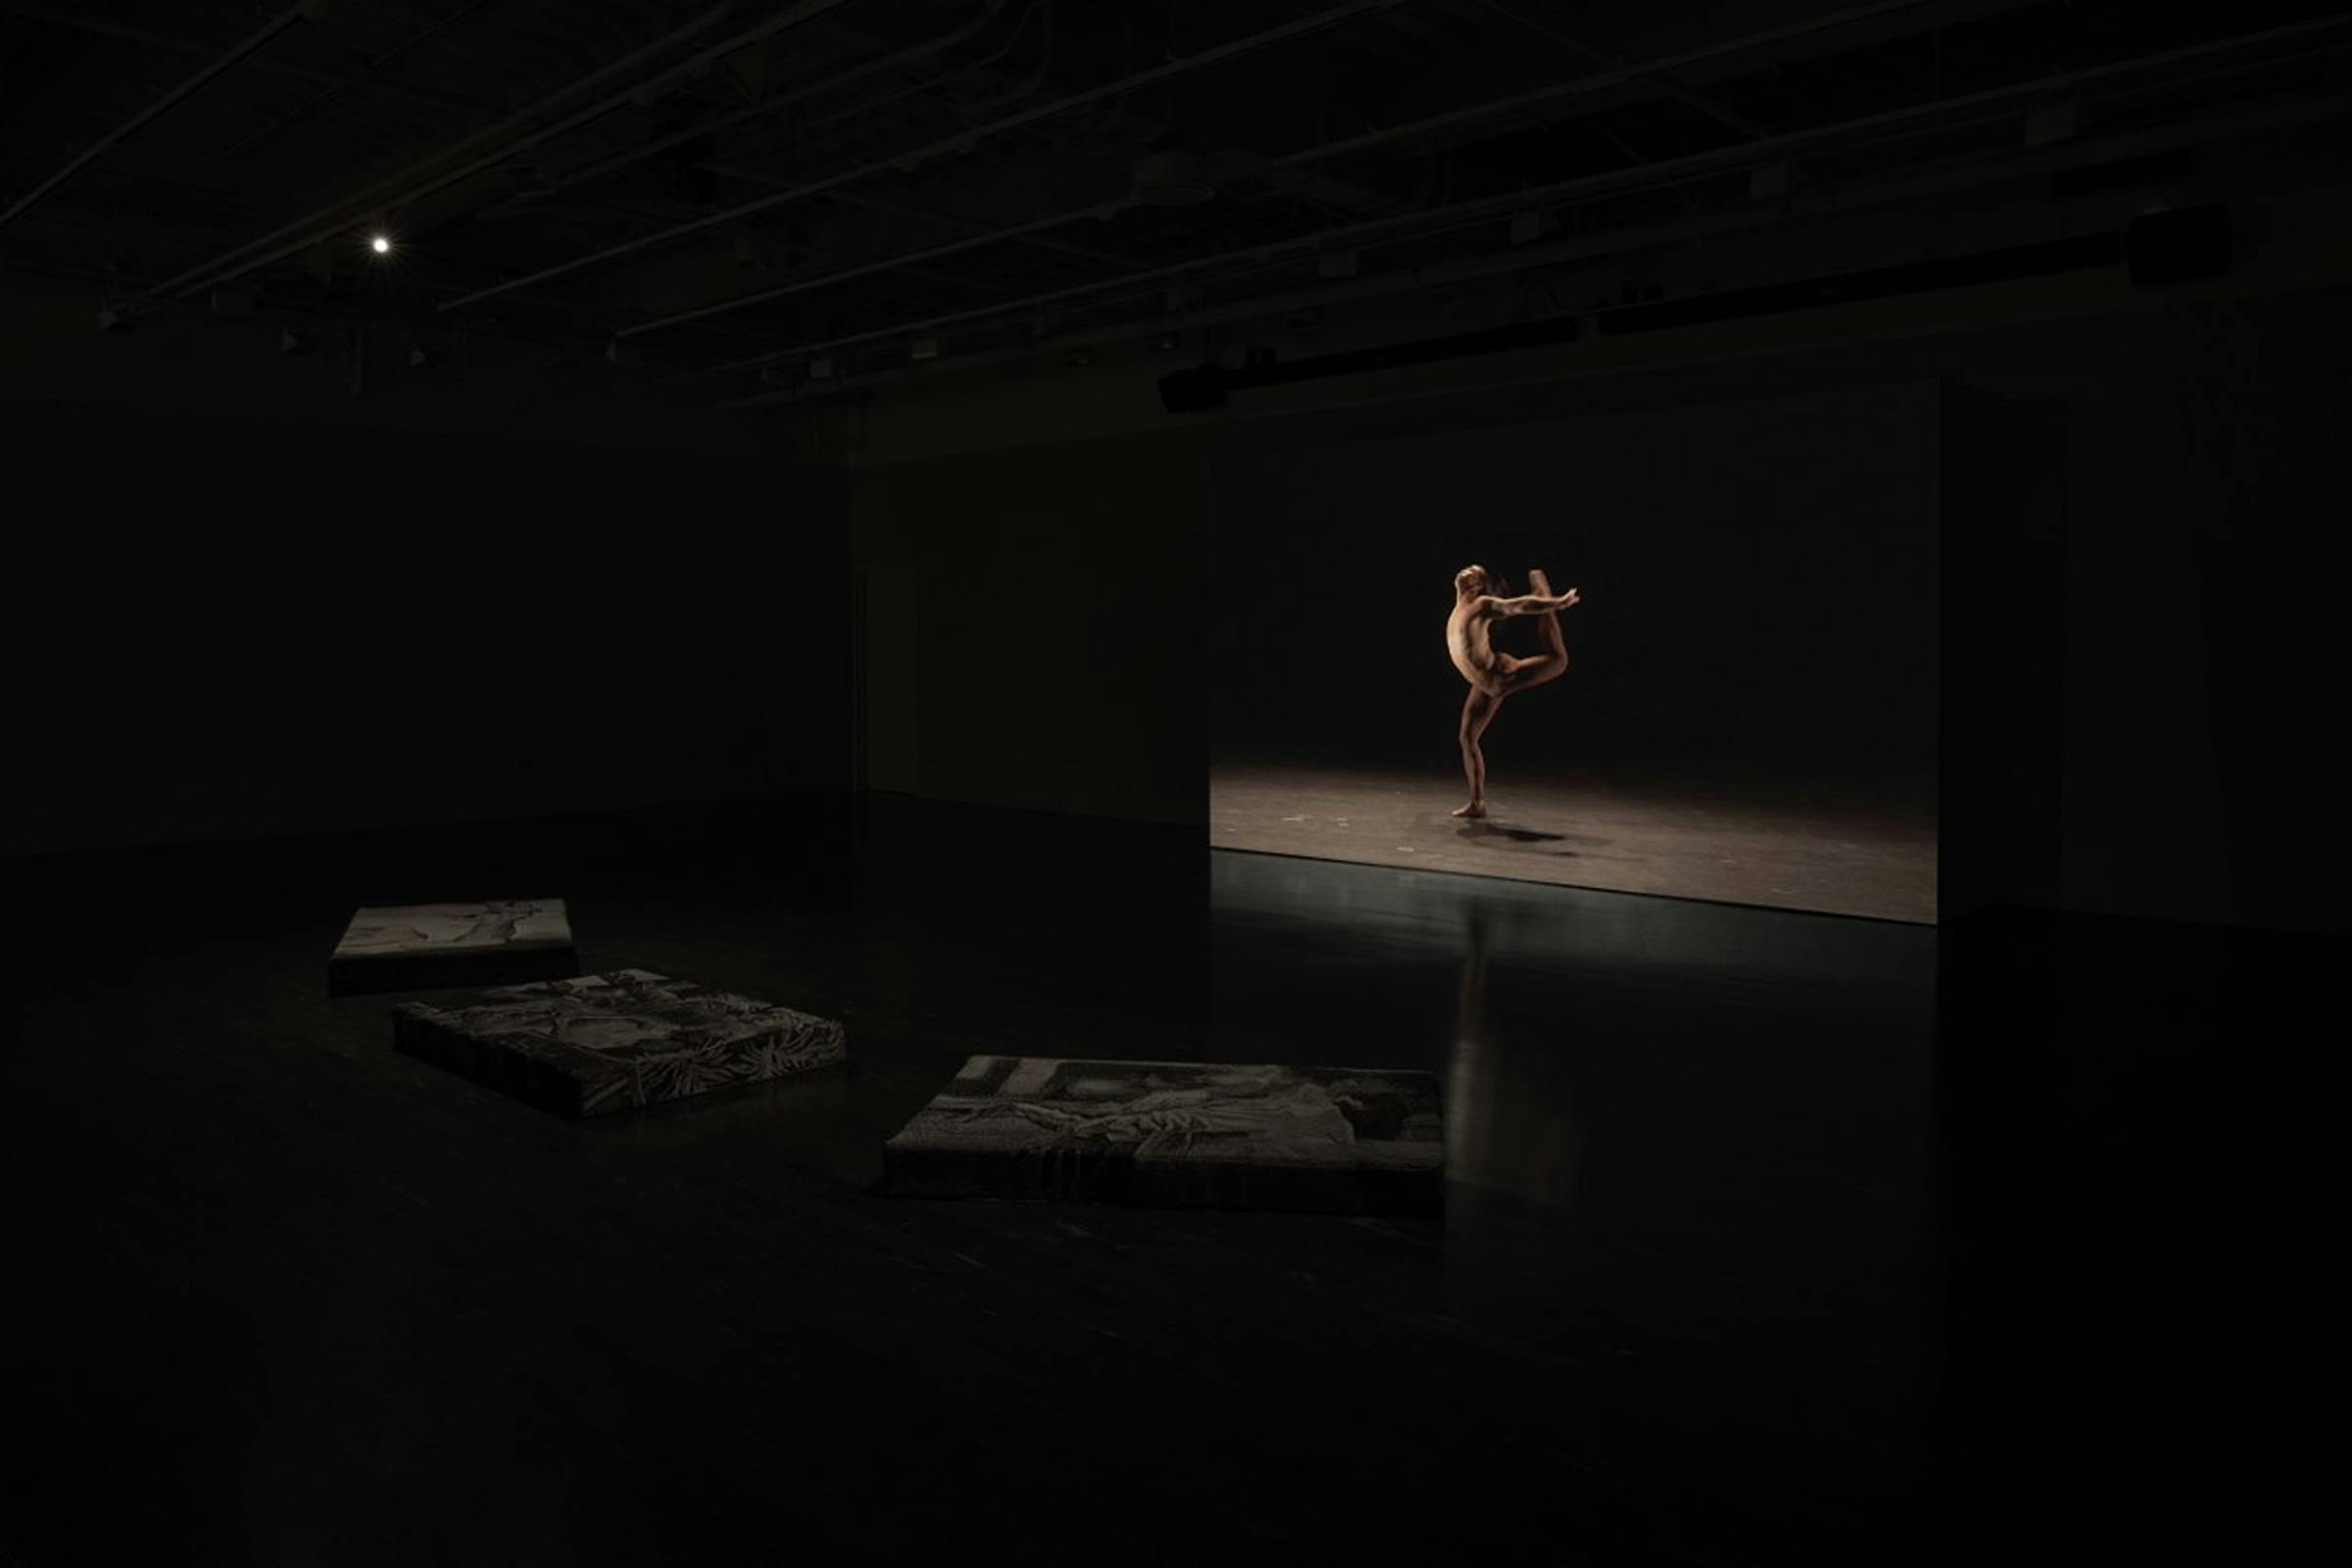 Installation view of The Heart of a Hand in a darkened space